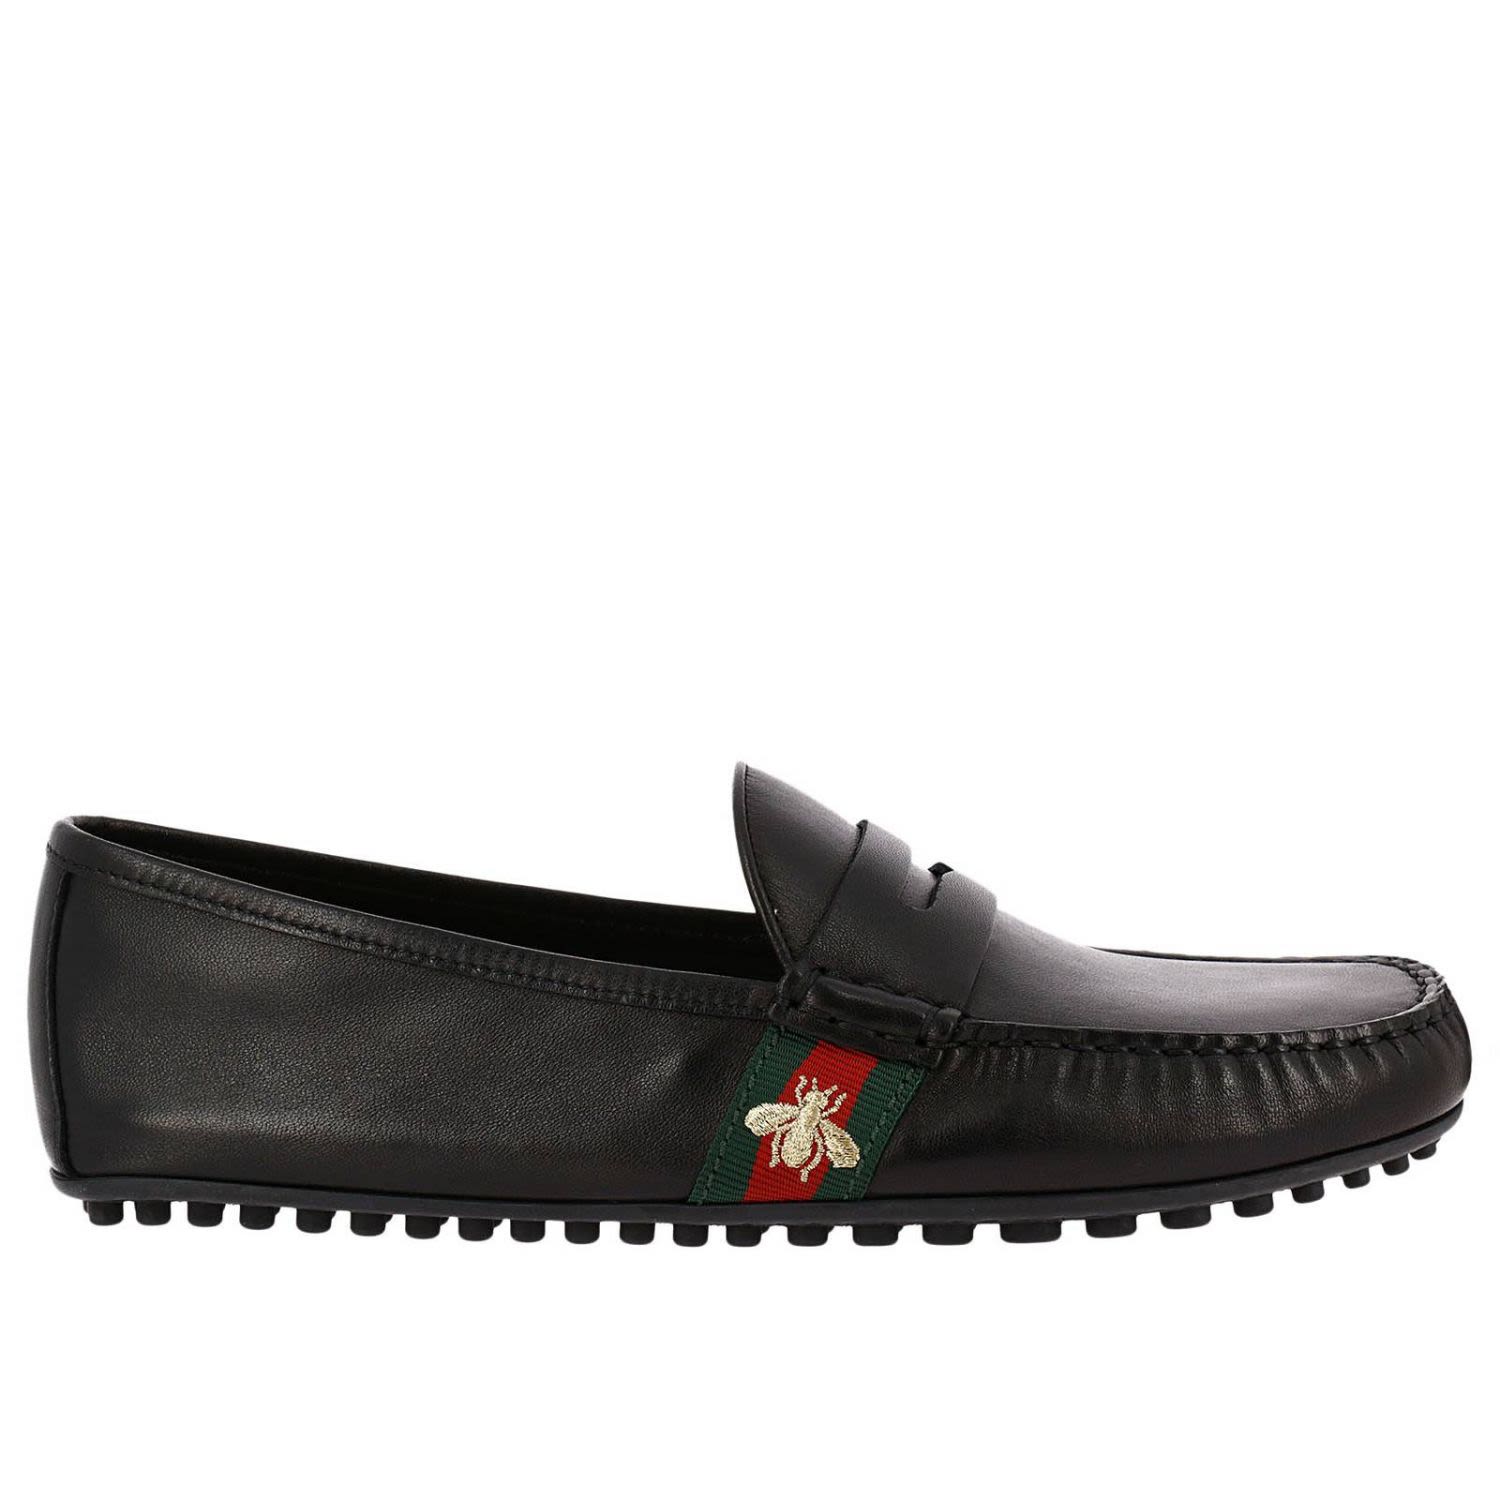 Gucci - Loafers Shoes Men Gucci - black, Men's Loafers & Boat Shoes ...